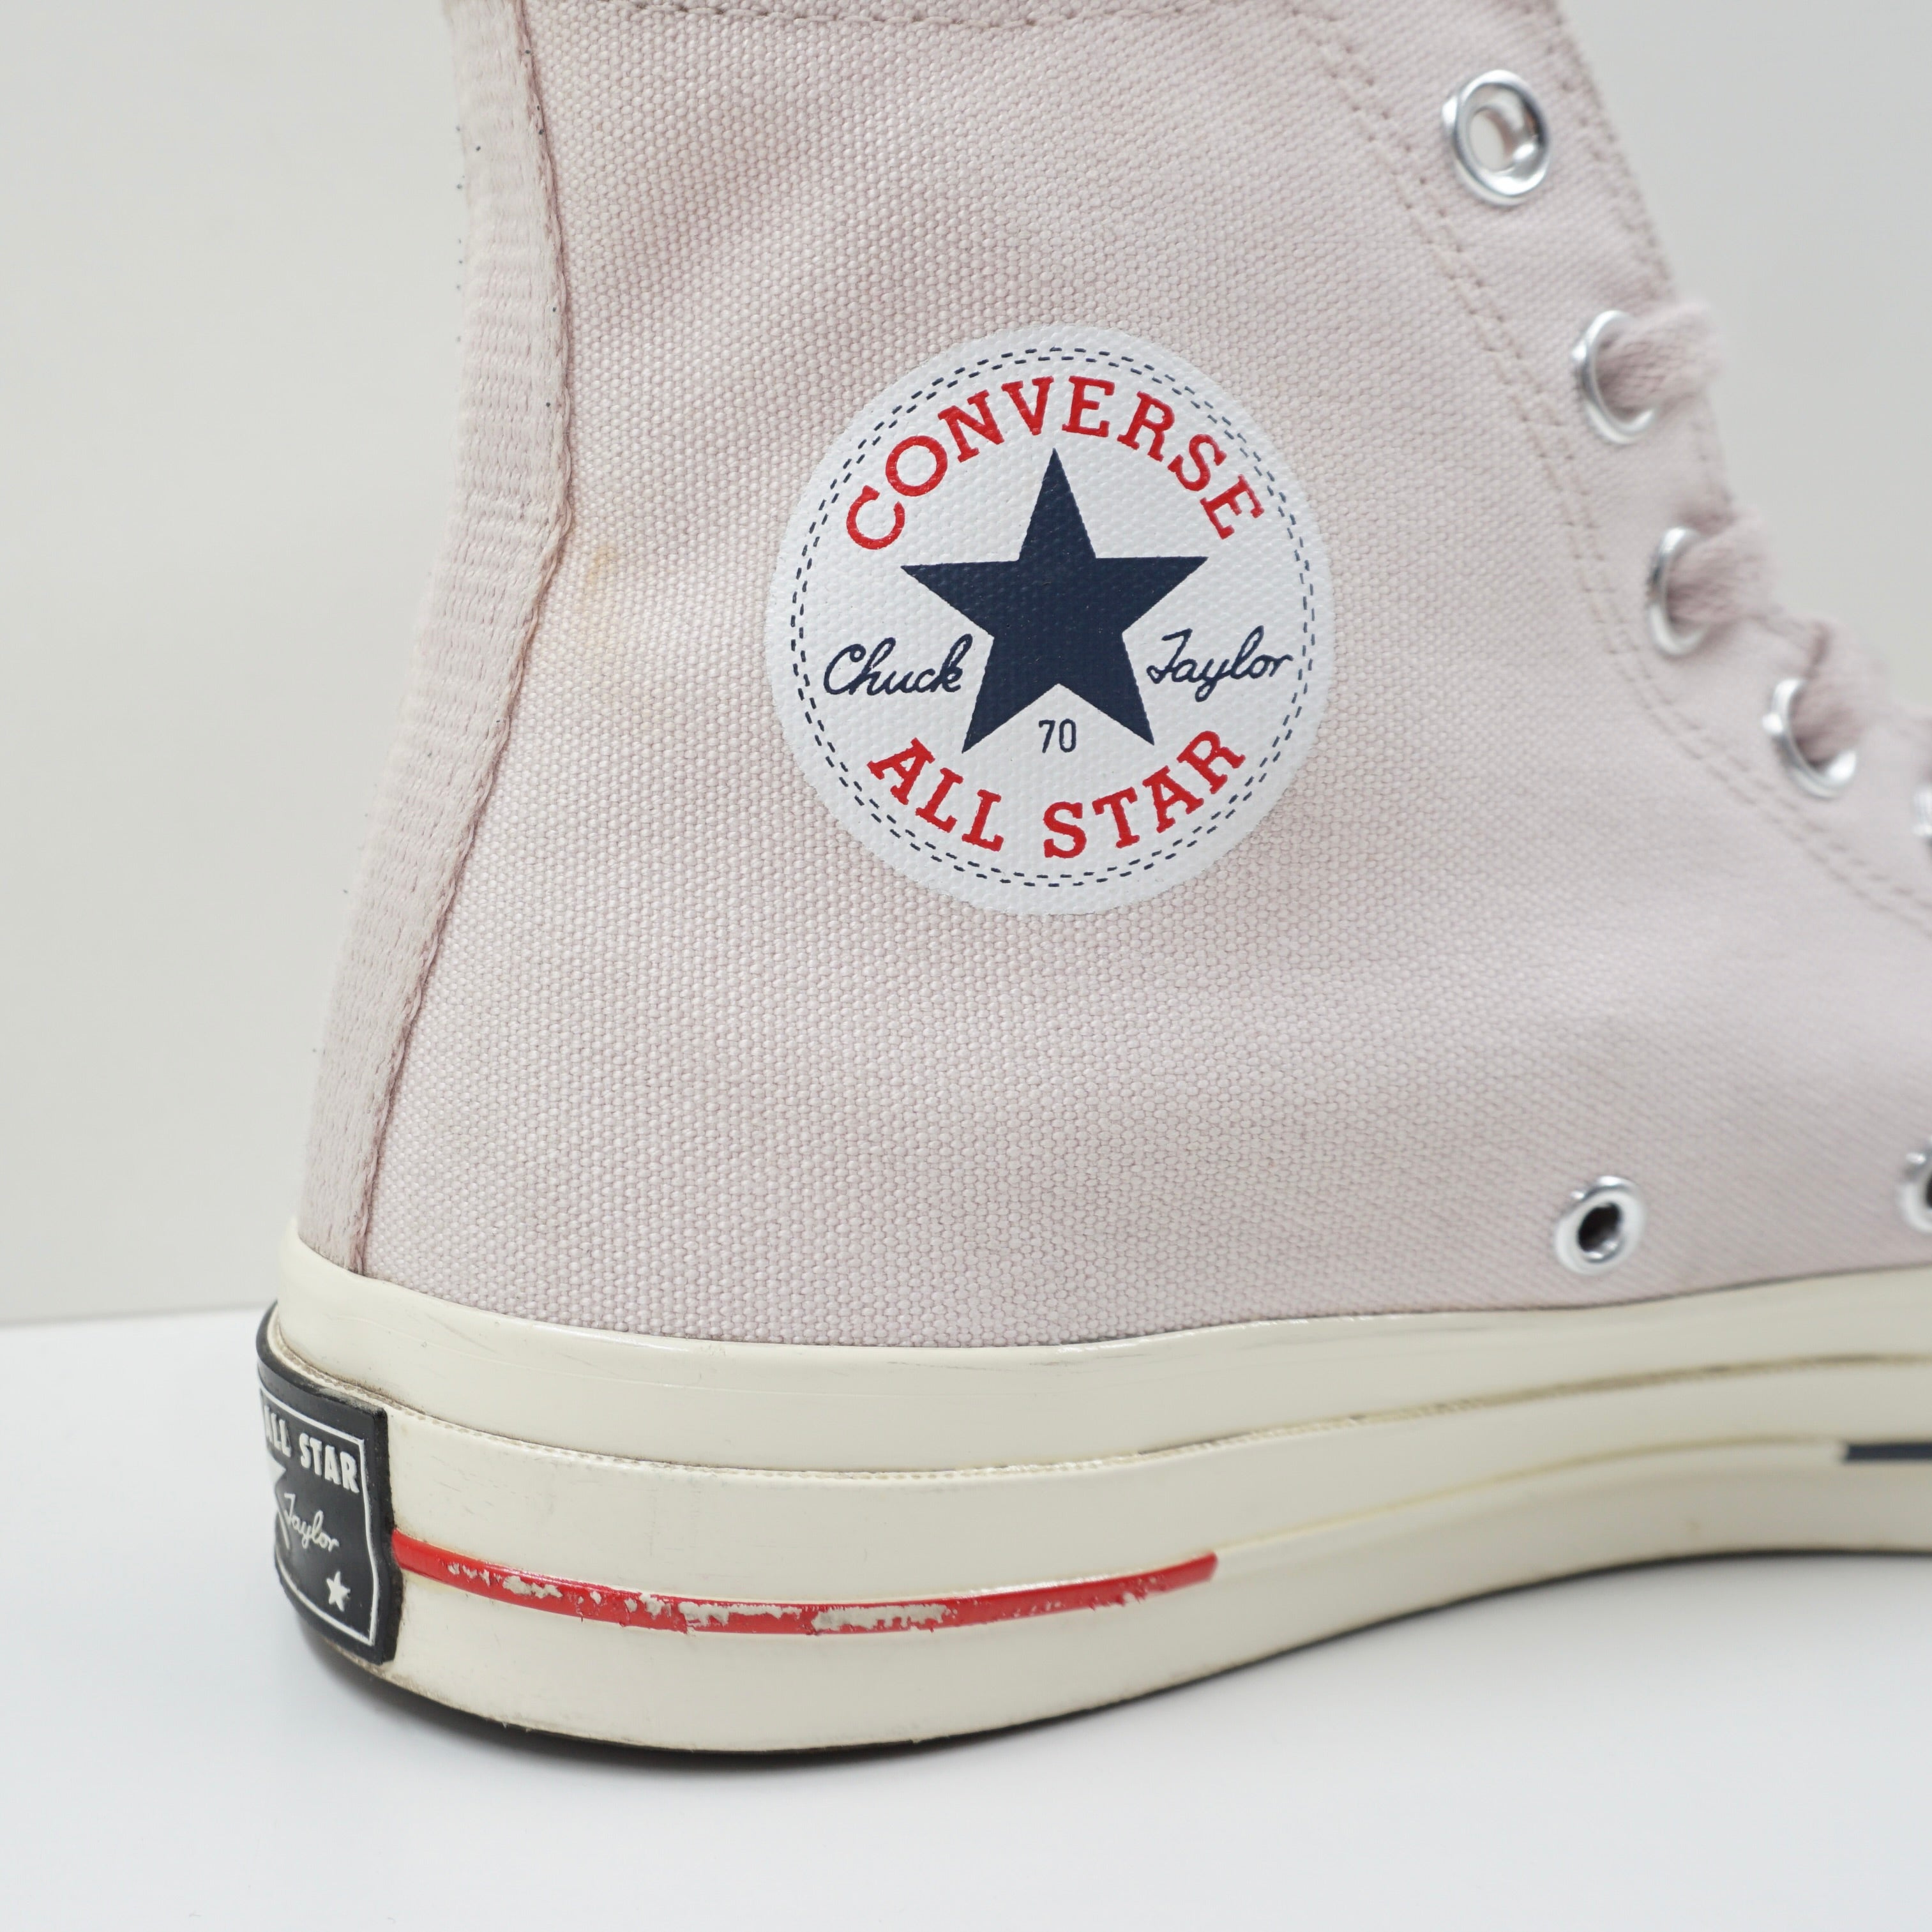 Converse Chuck Taylor All Star 70 High Heritage Court Barely Rose